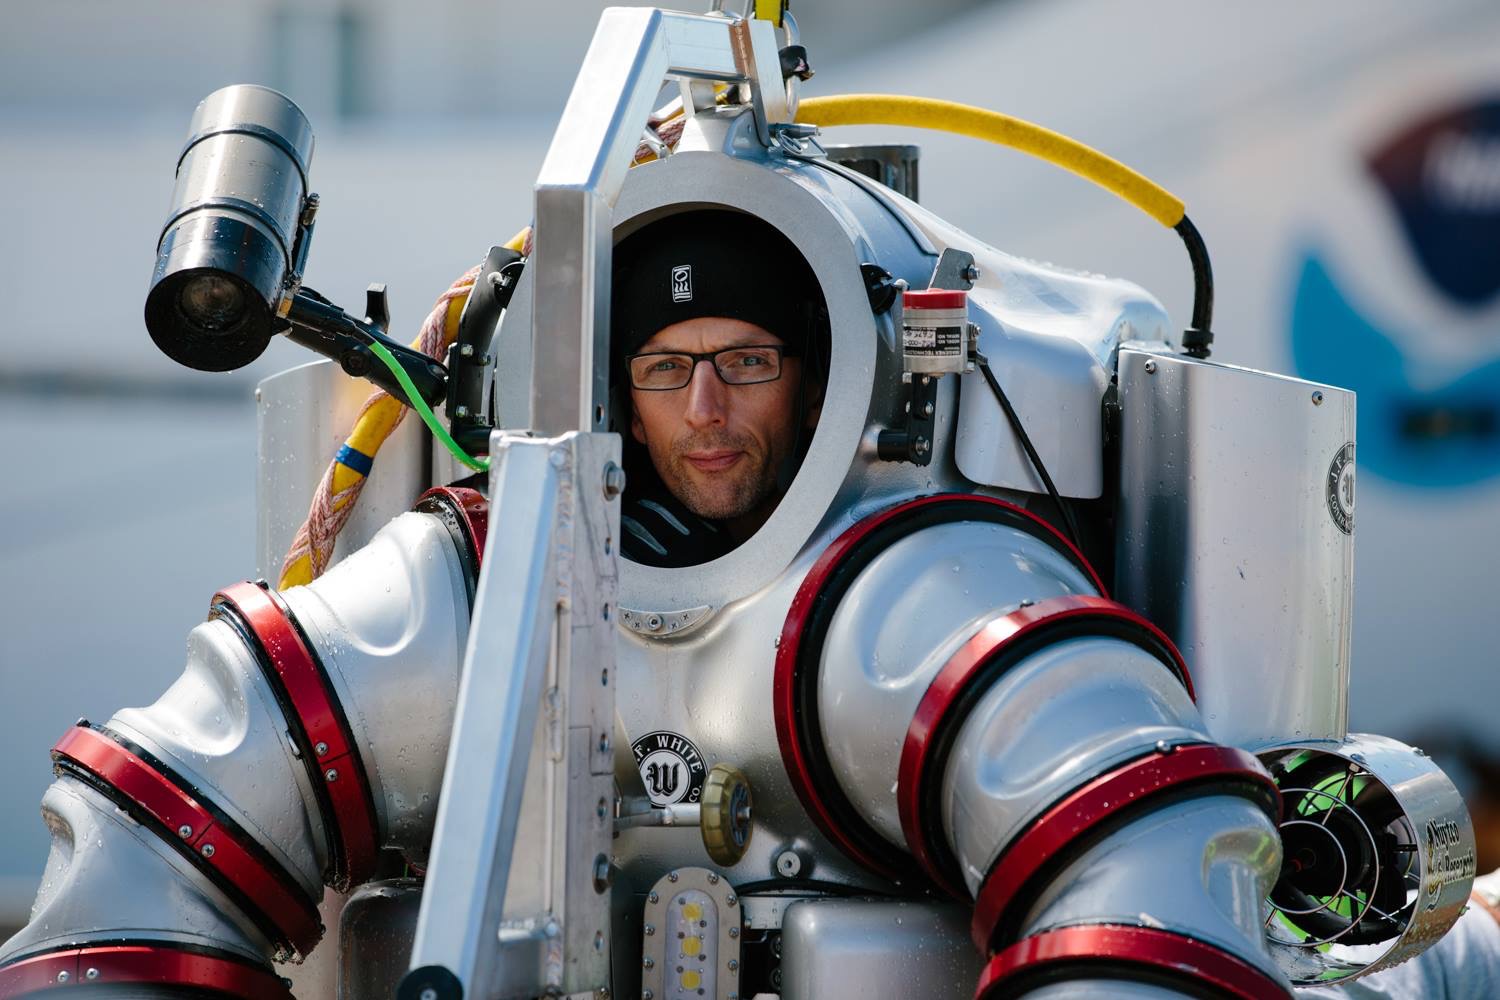 Phil Short in his ExoSuit, which allows him to reach depths of 300 metres 